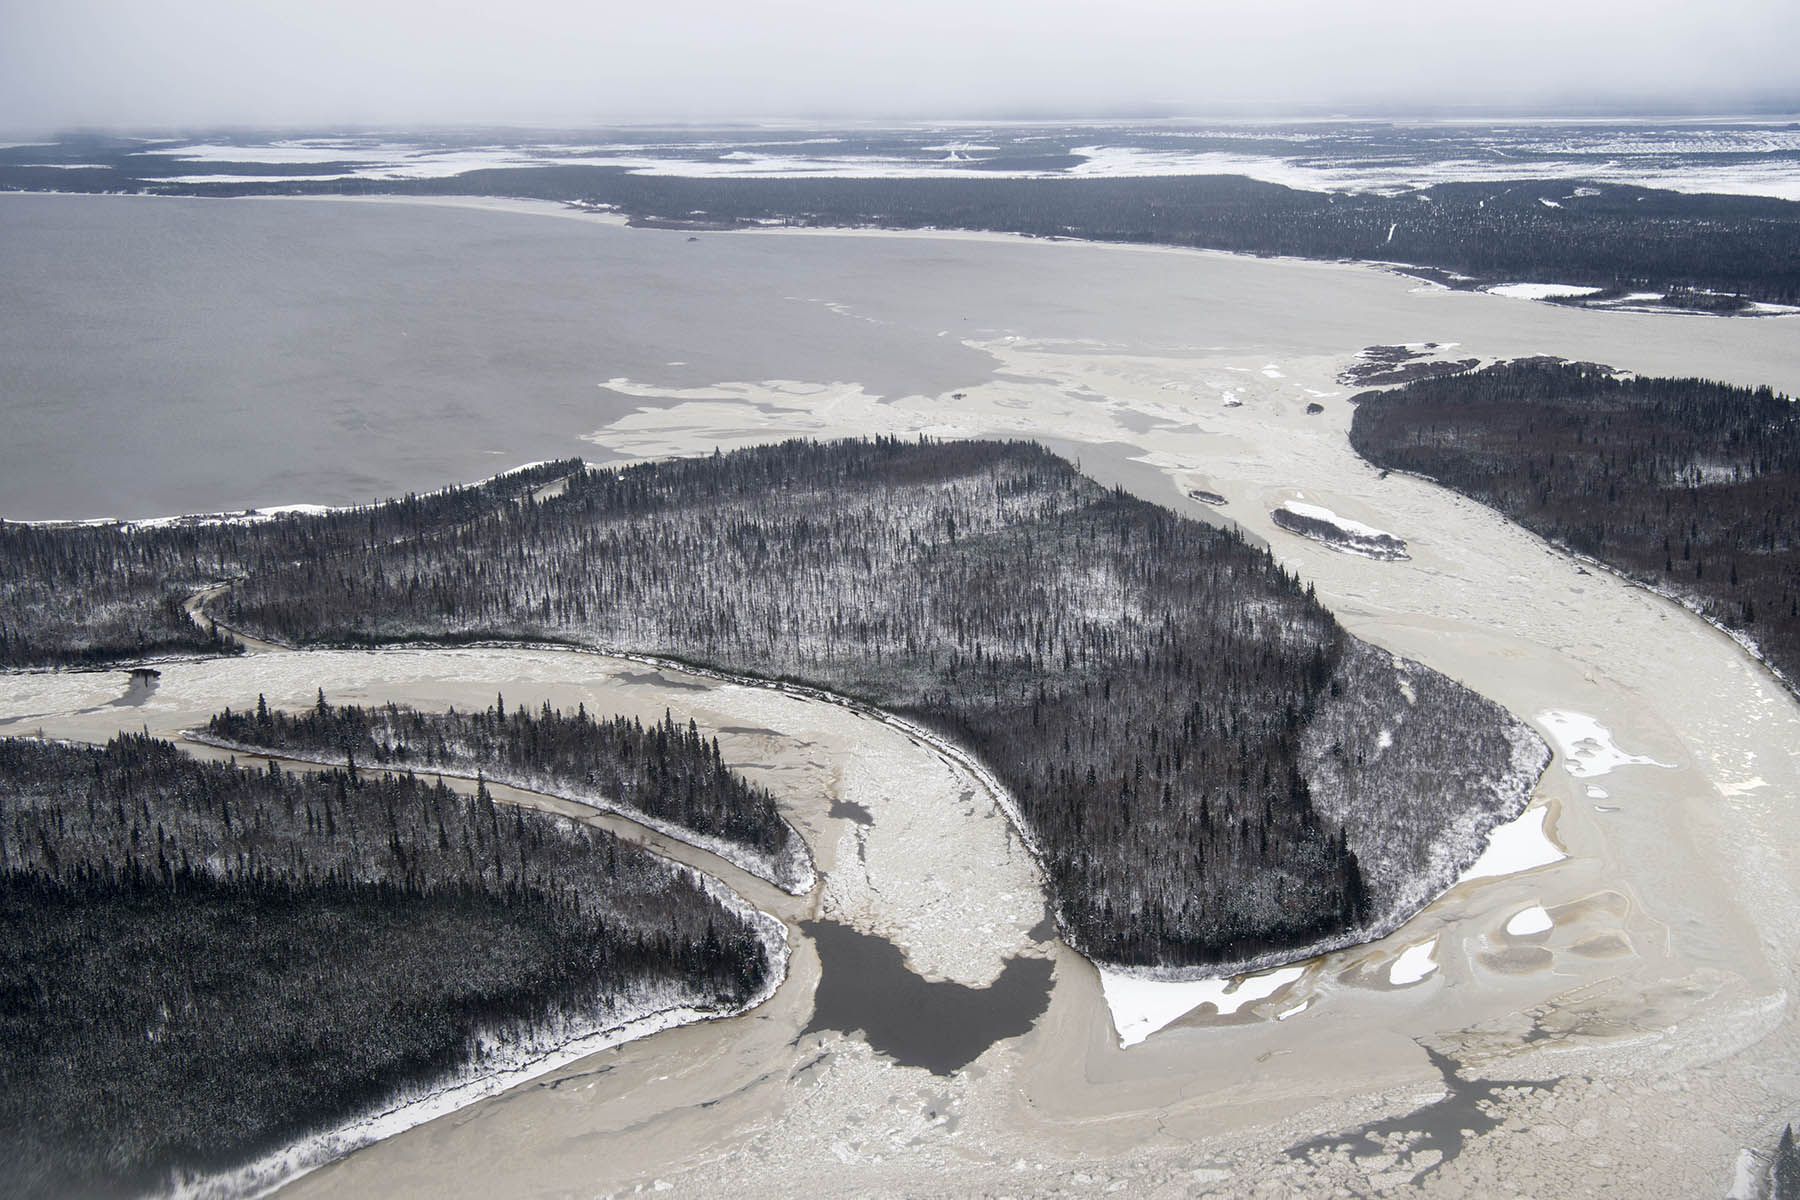 The waters from the Churchill River converge with the water from Lake Melville near Happy Valley-Goose Bay, Labrador. Image by Michael Seamans / The Weather Channel. Canada, 2019.